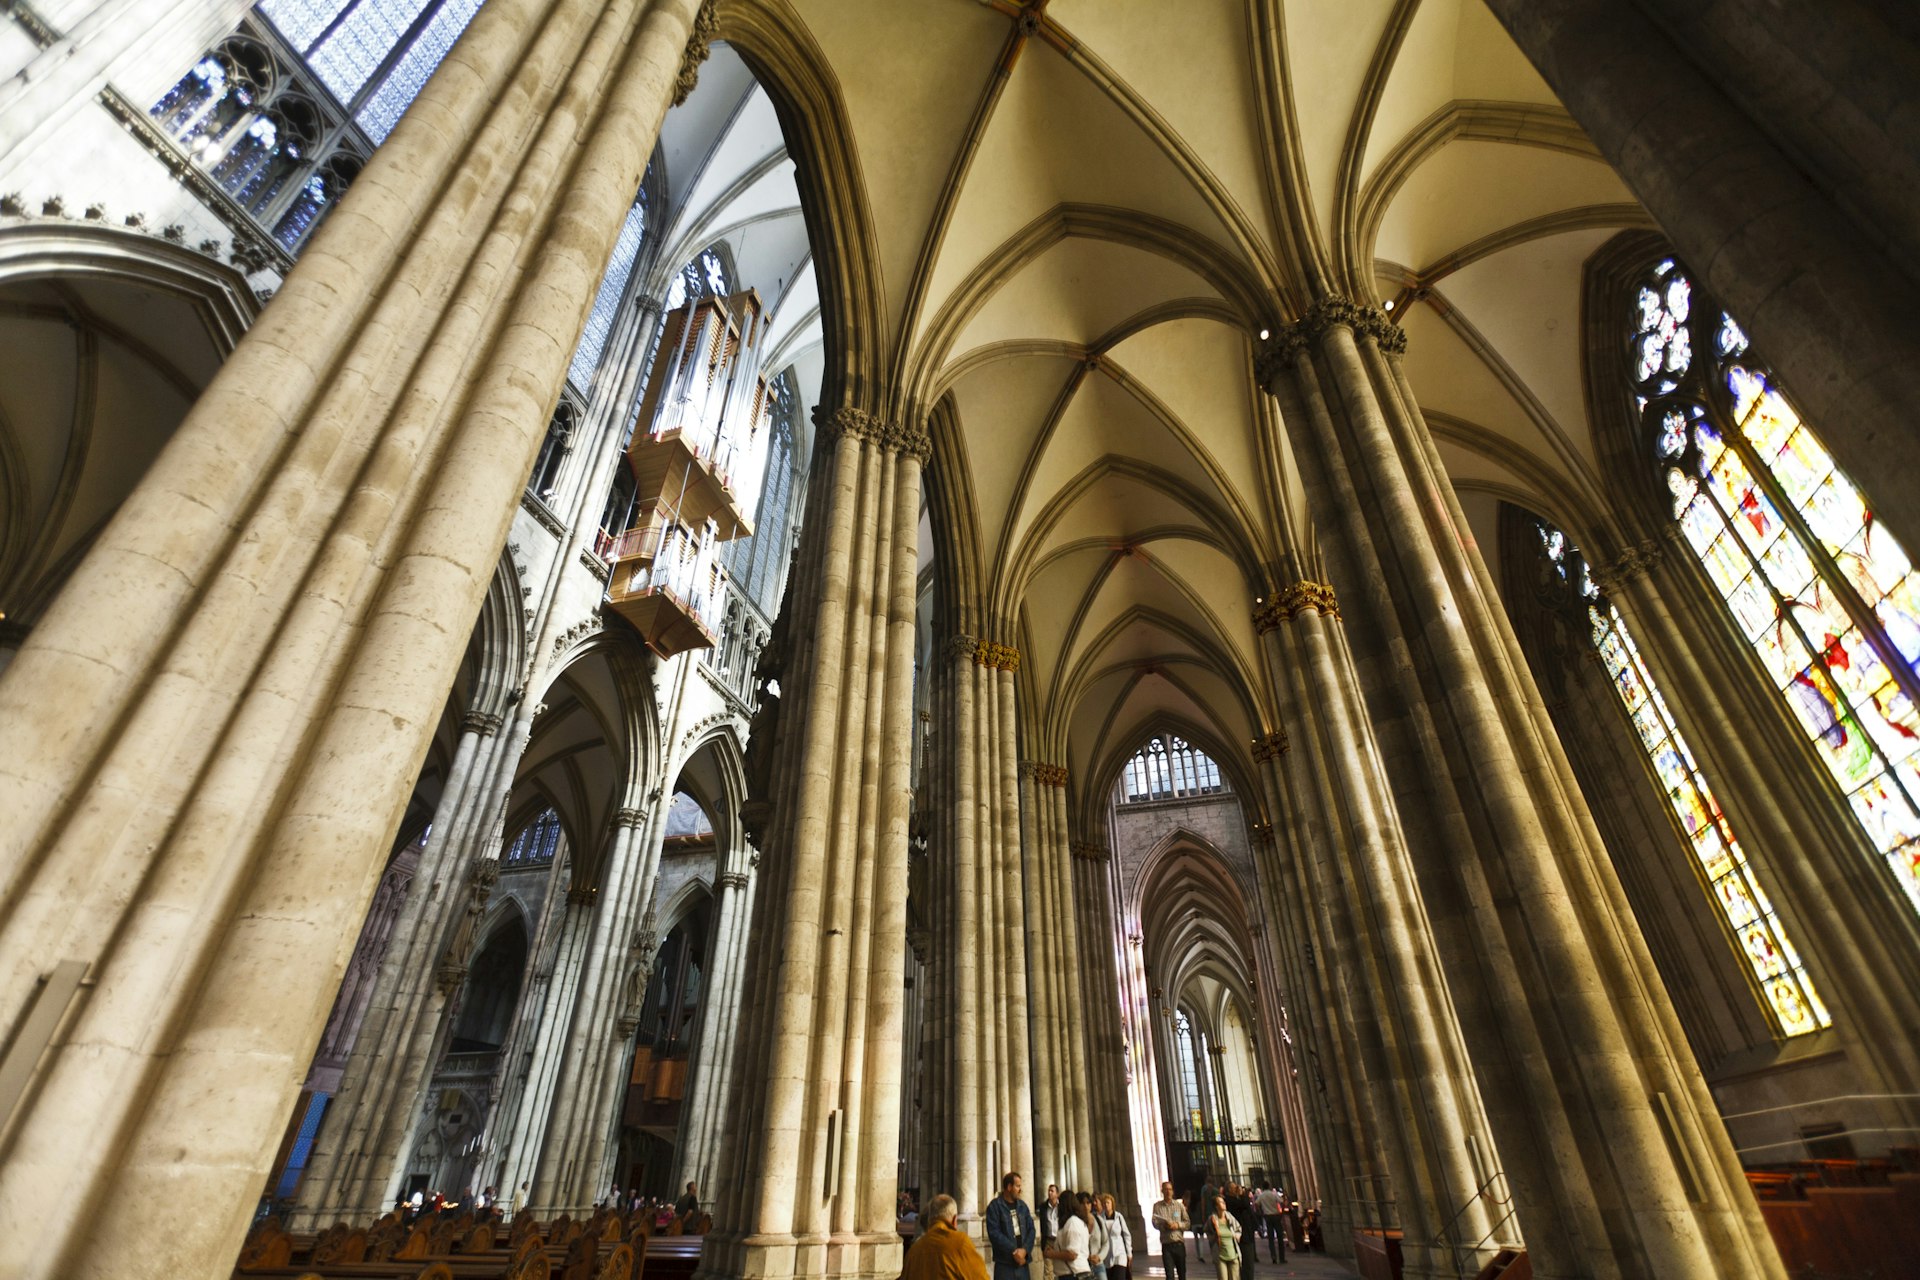 Lofty arches, columns and stained glass windows of the Gothic Cologne Cathedral (Kolner Dom)